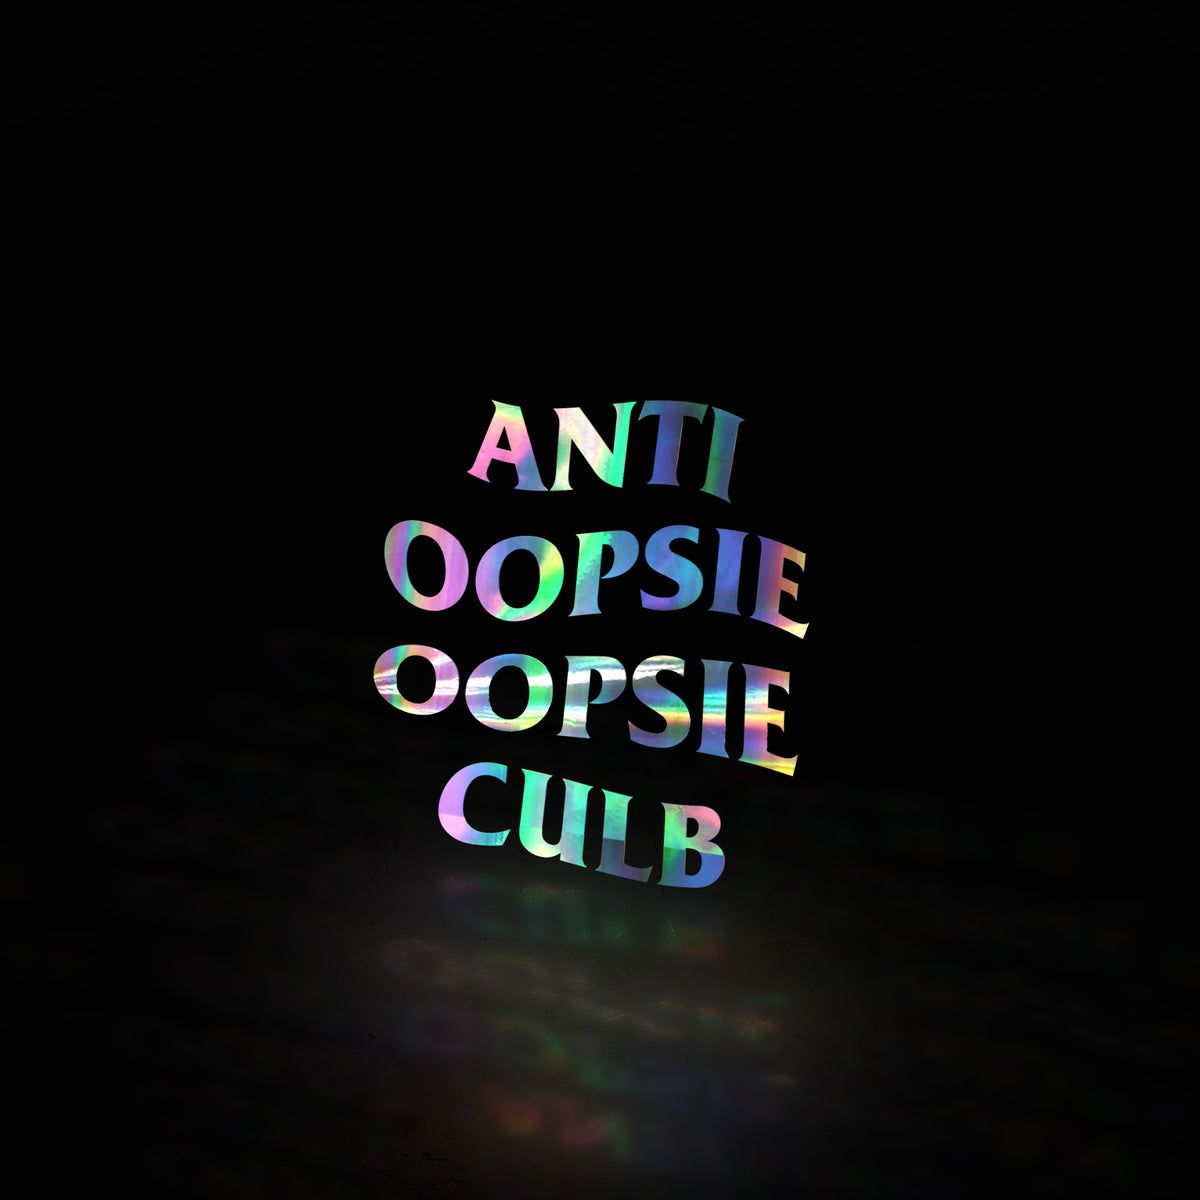 The words Anti Ooopsie Ooopsie Culb are written in holographic letters against a black background. - Anti Social Social Club